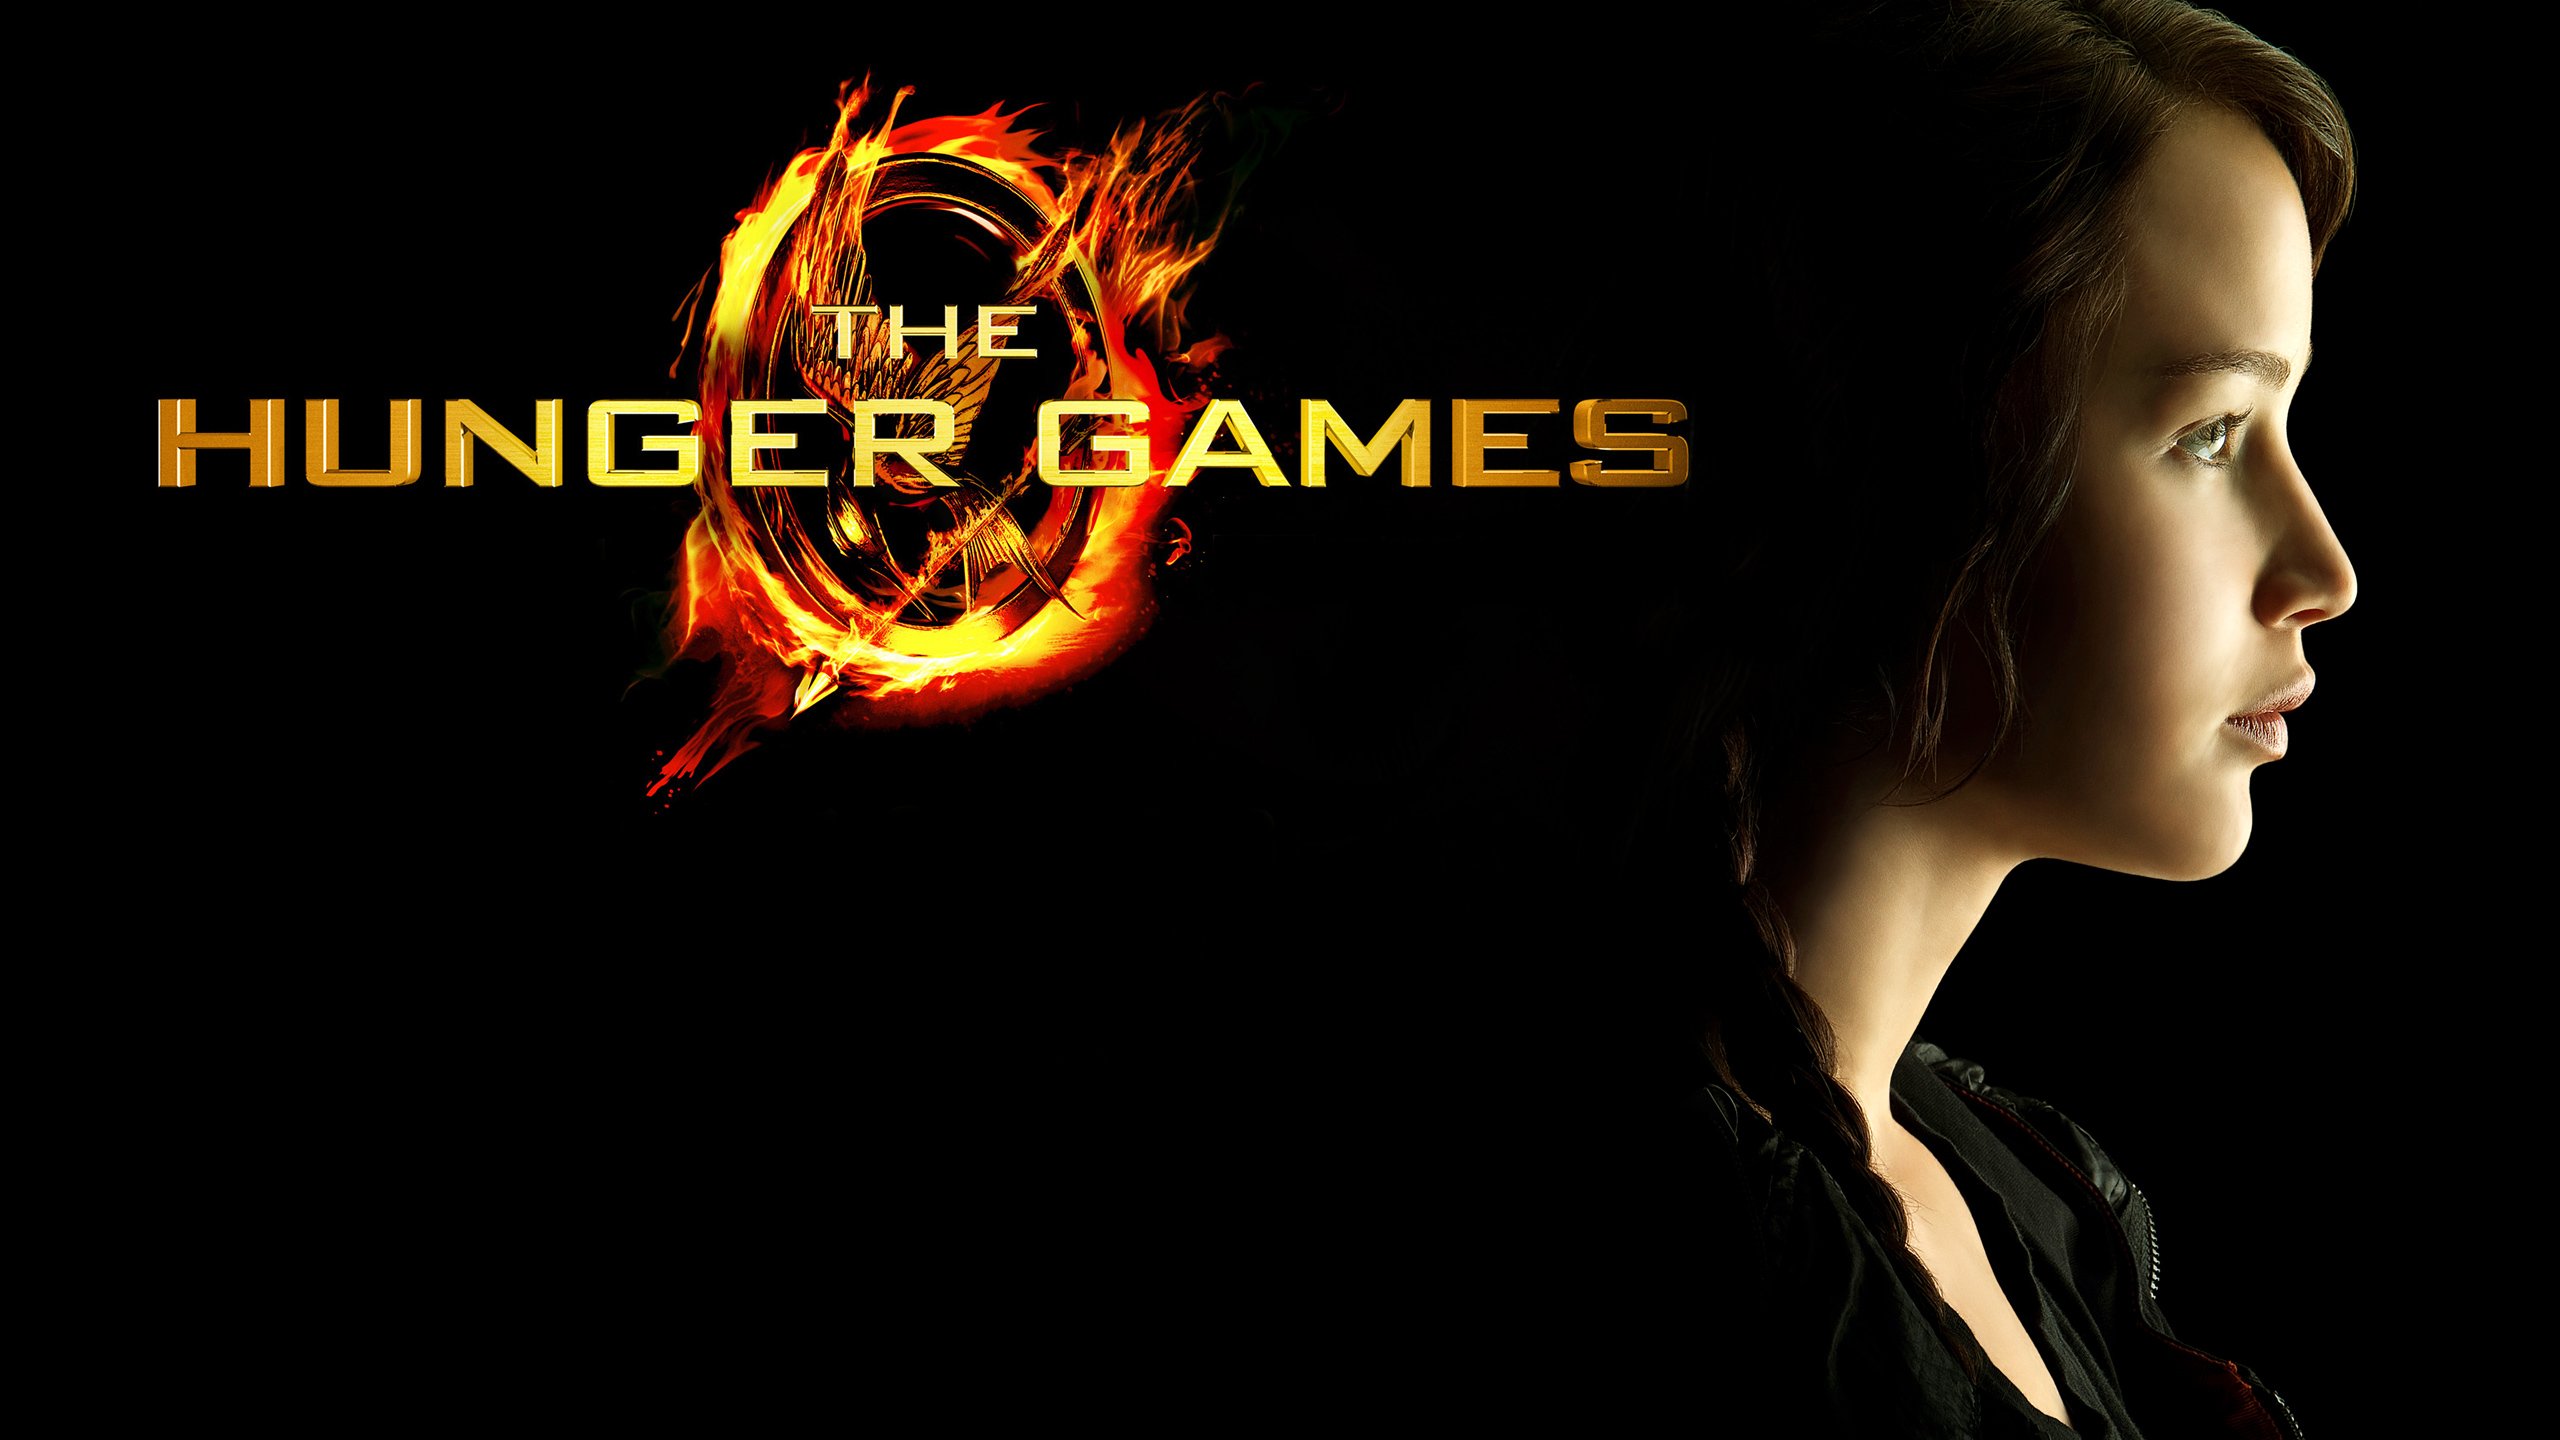 Jennifer Lawrence Hunger Games Exclusive HD Wallpapers 2815